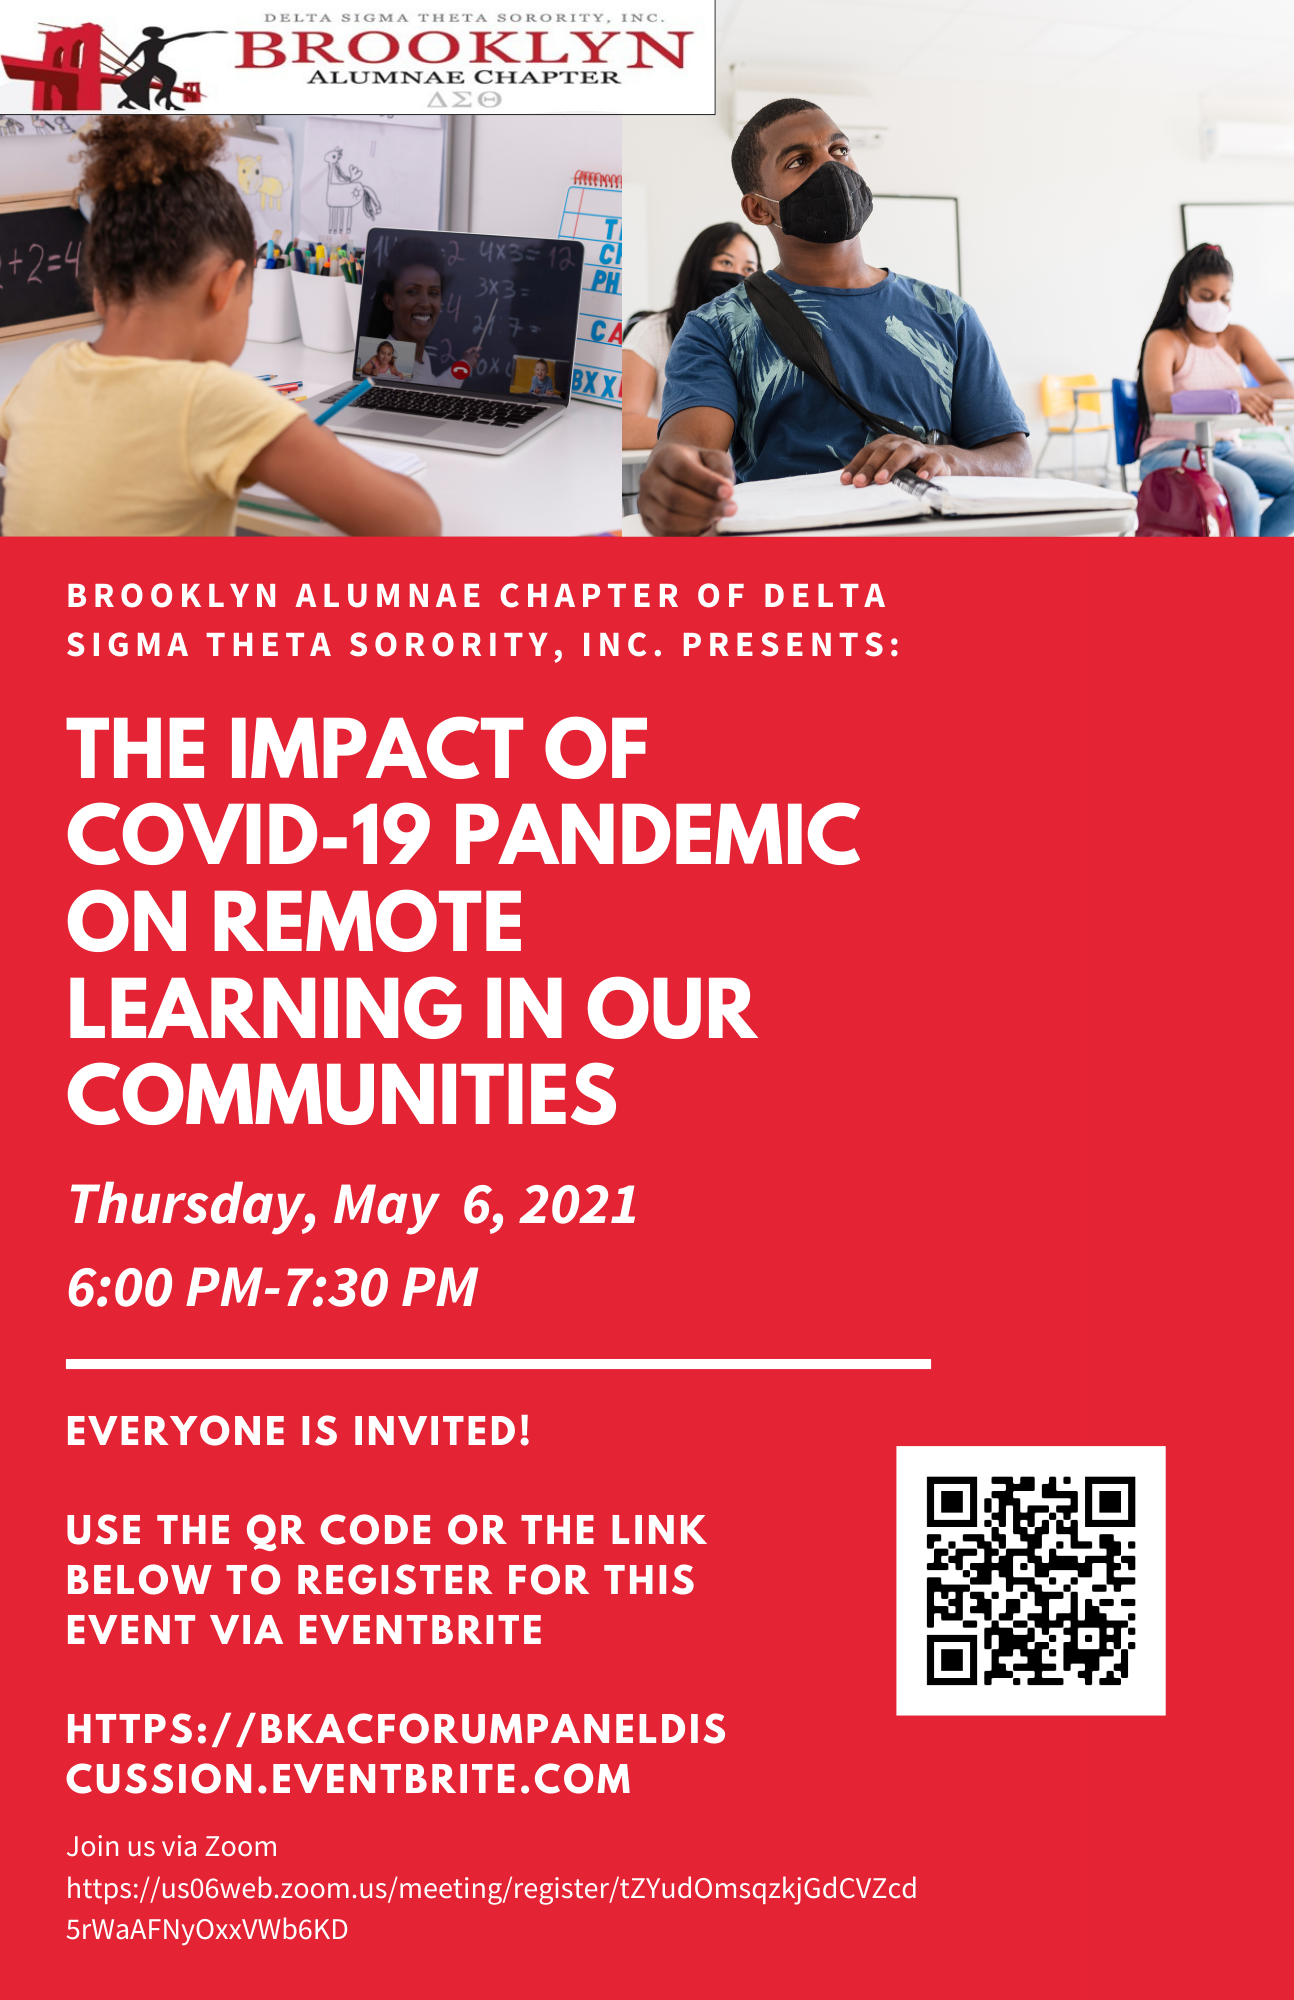 The Impact of Covid-19 Pandemic on Remote Learning in our Communities